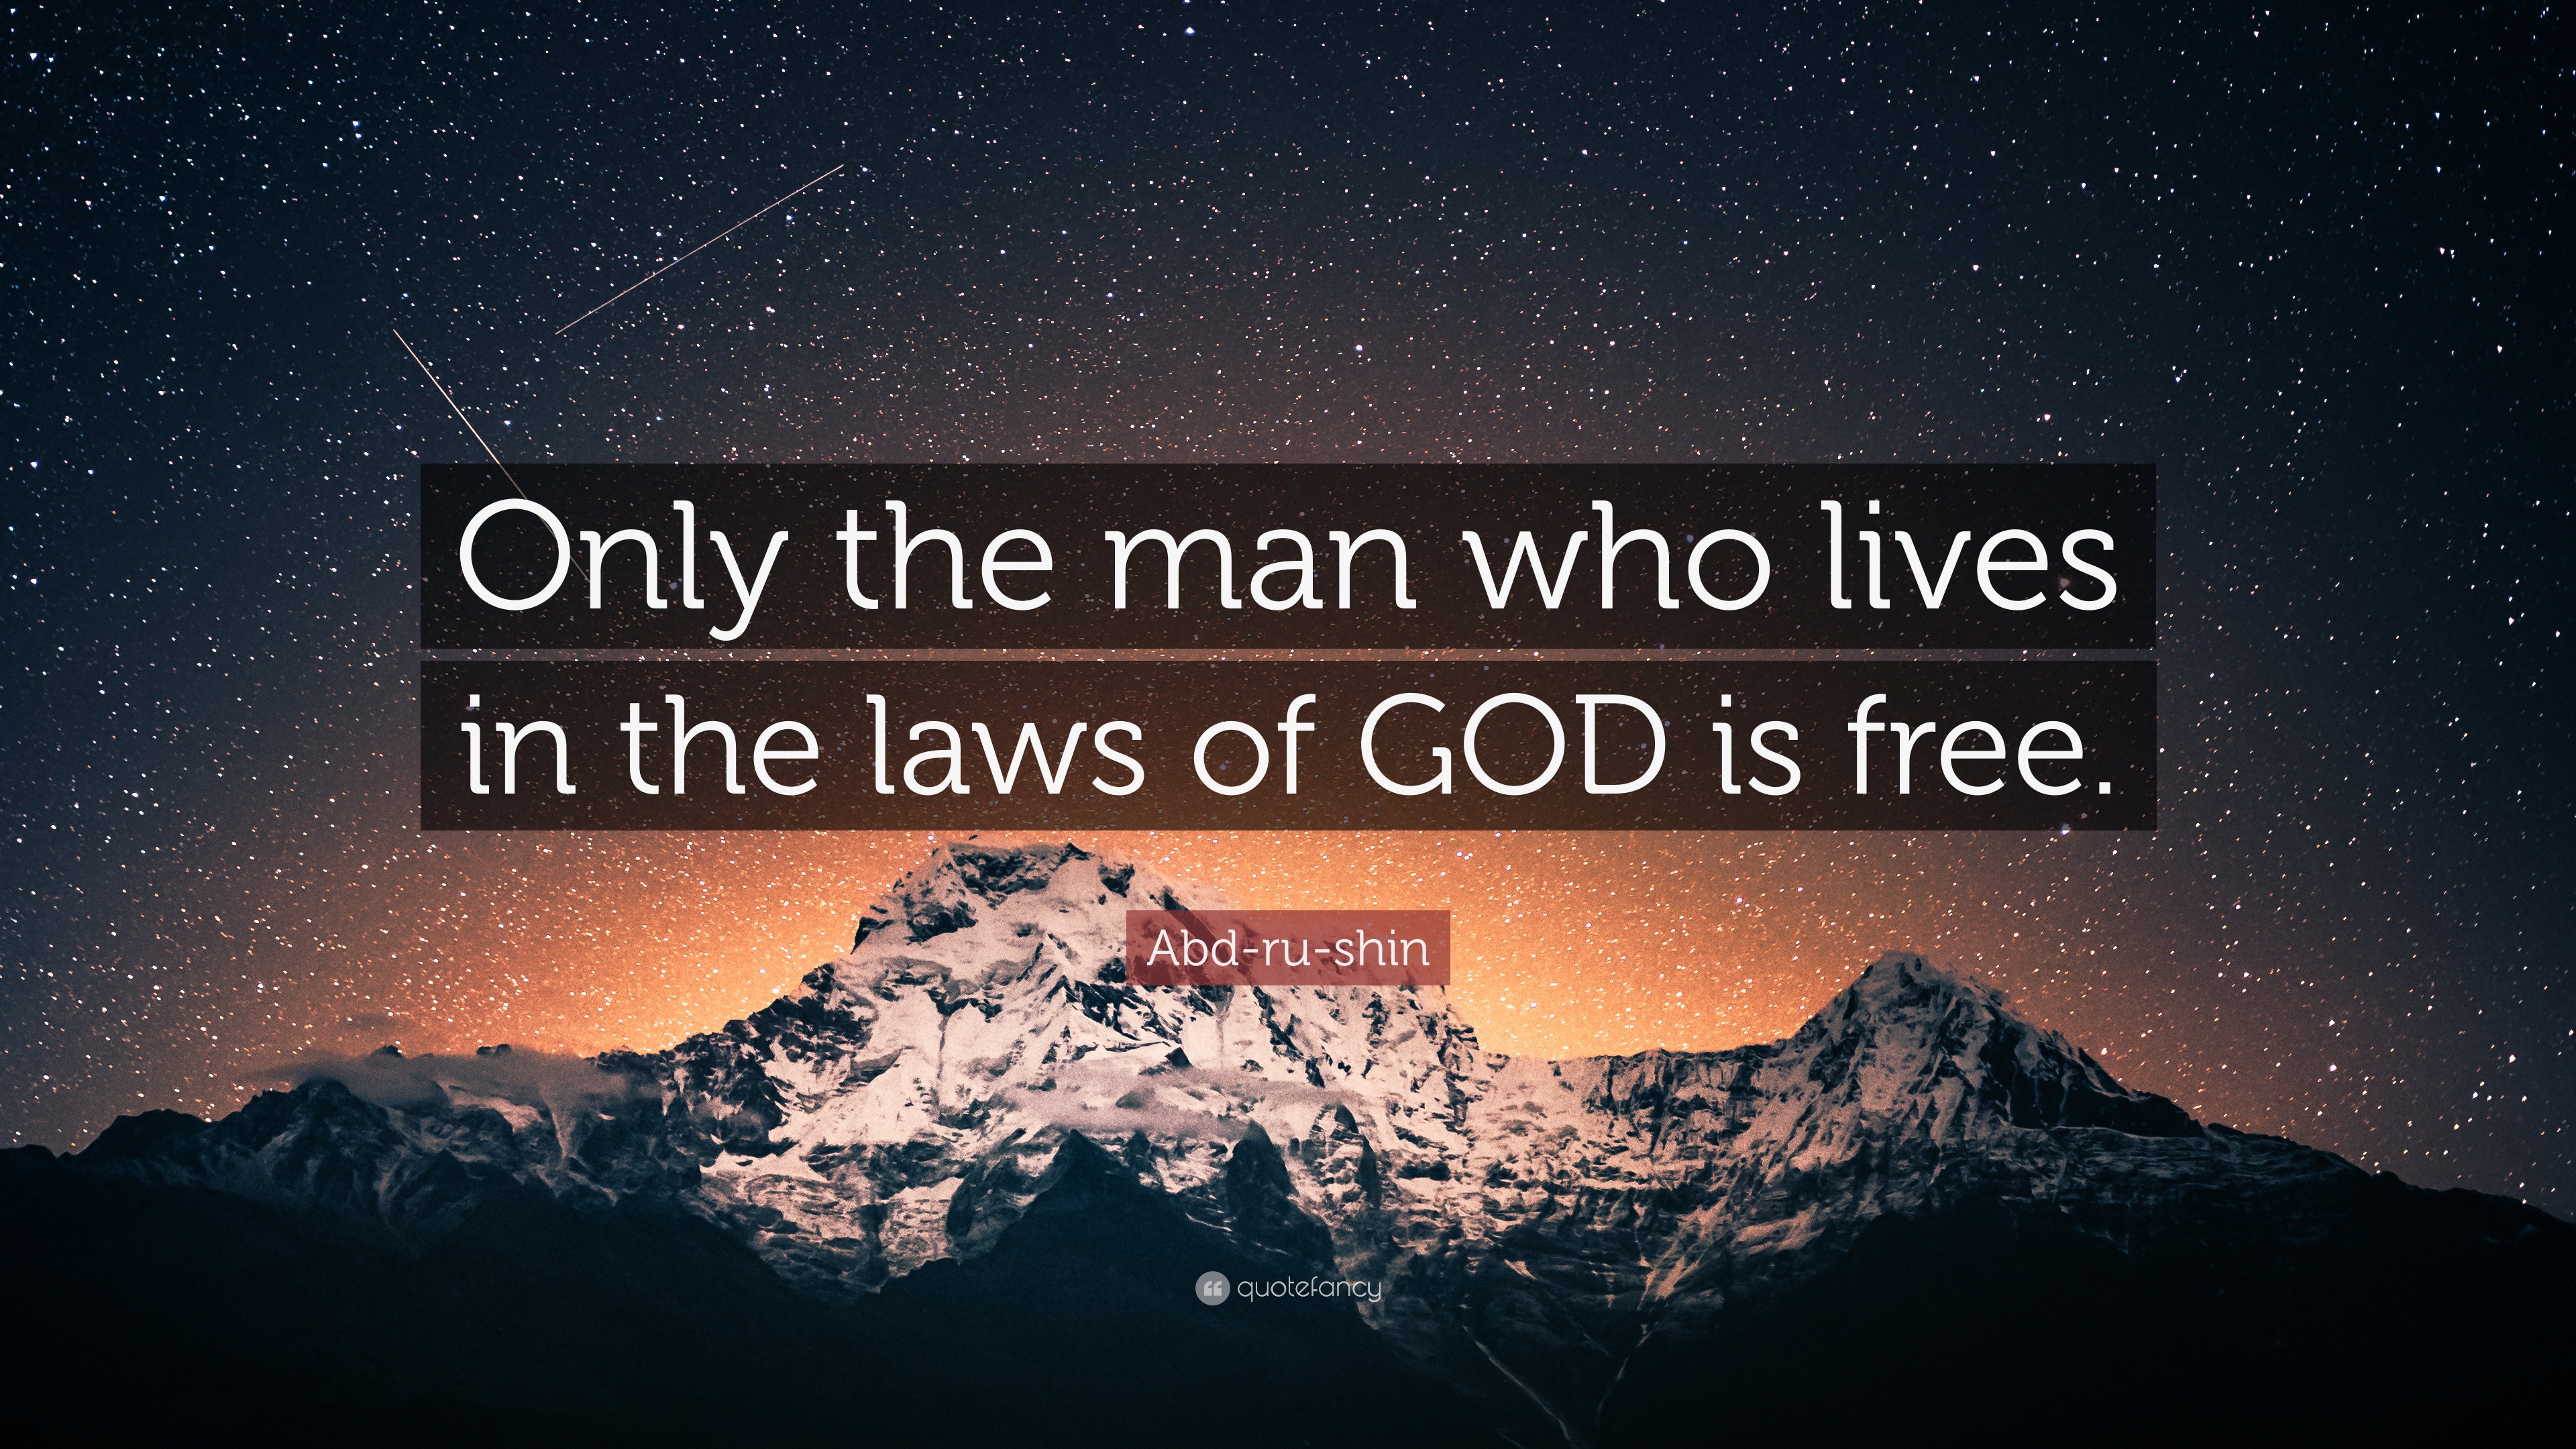 Abd-ru-shin Quote: “Only the man who lives in the laws of GOD is free.”